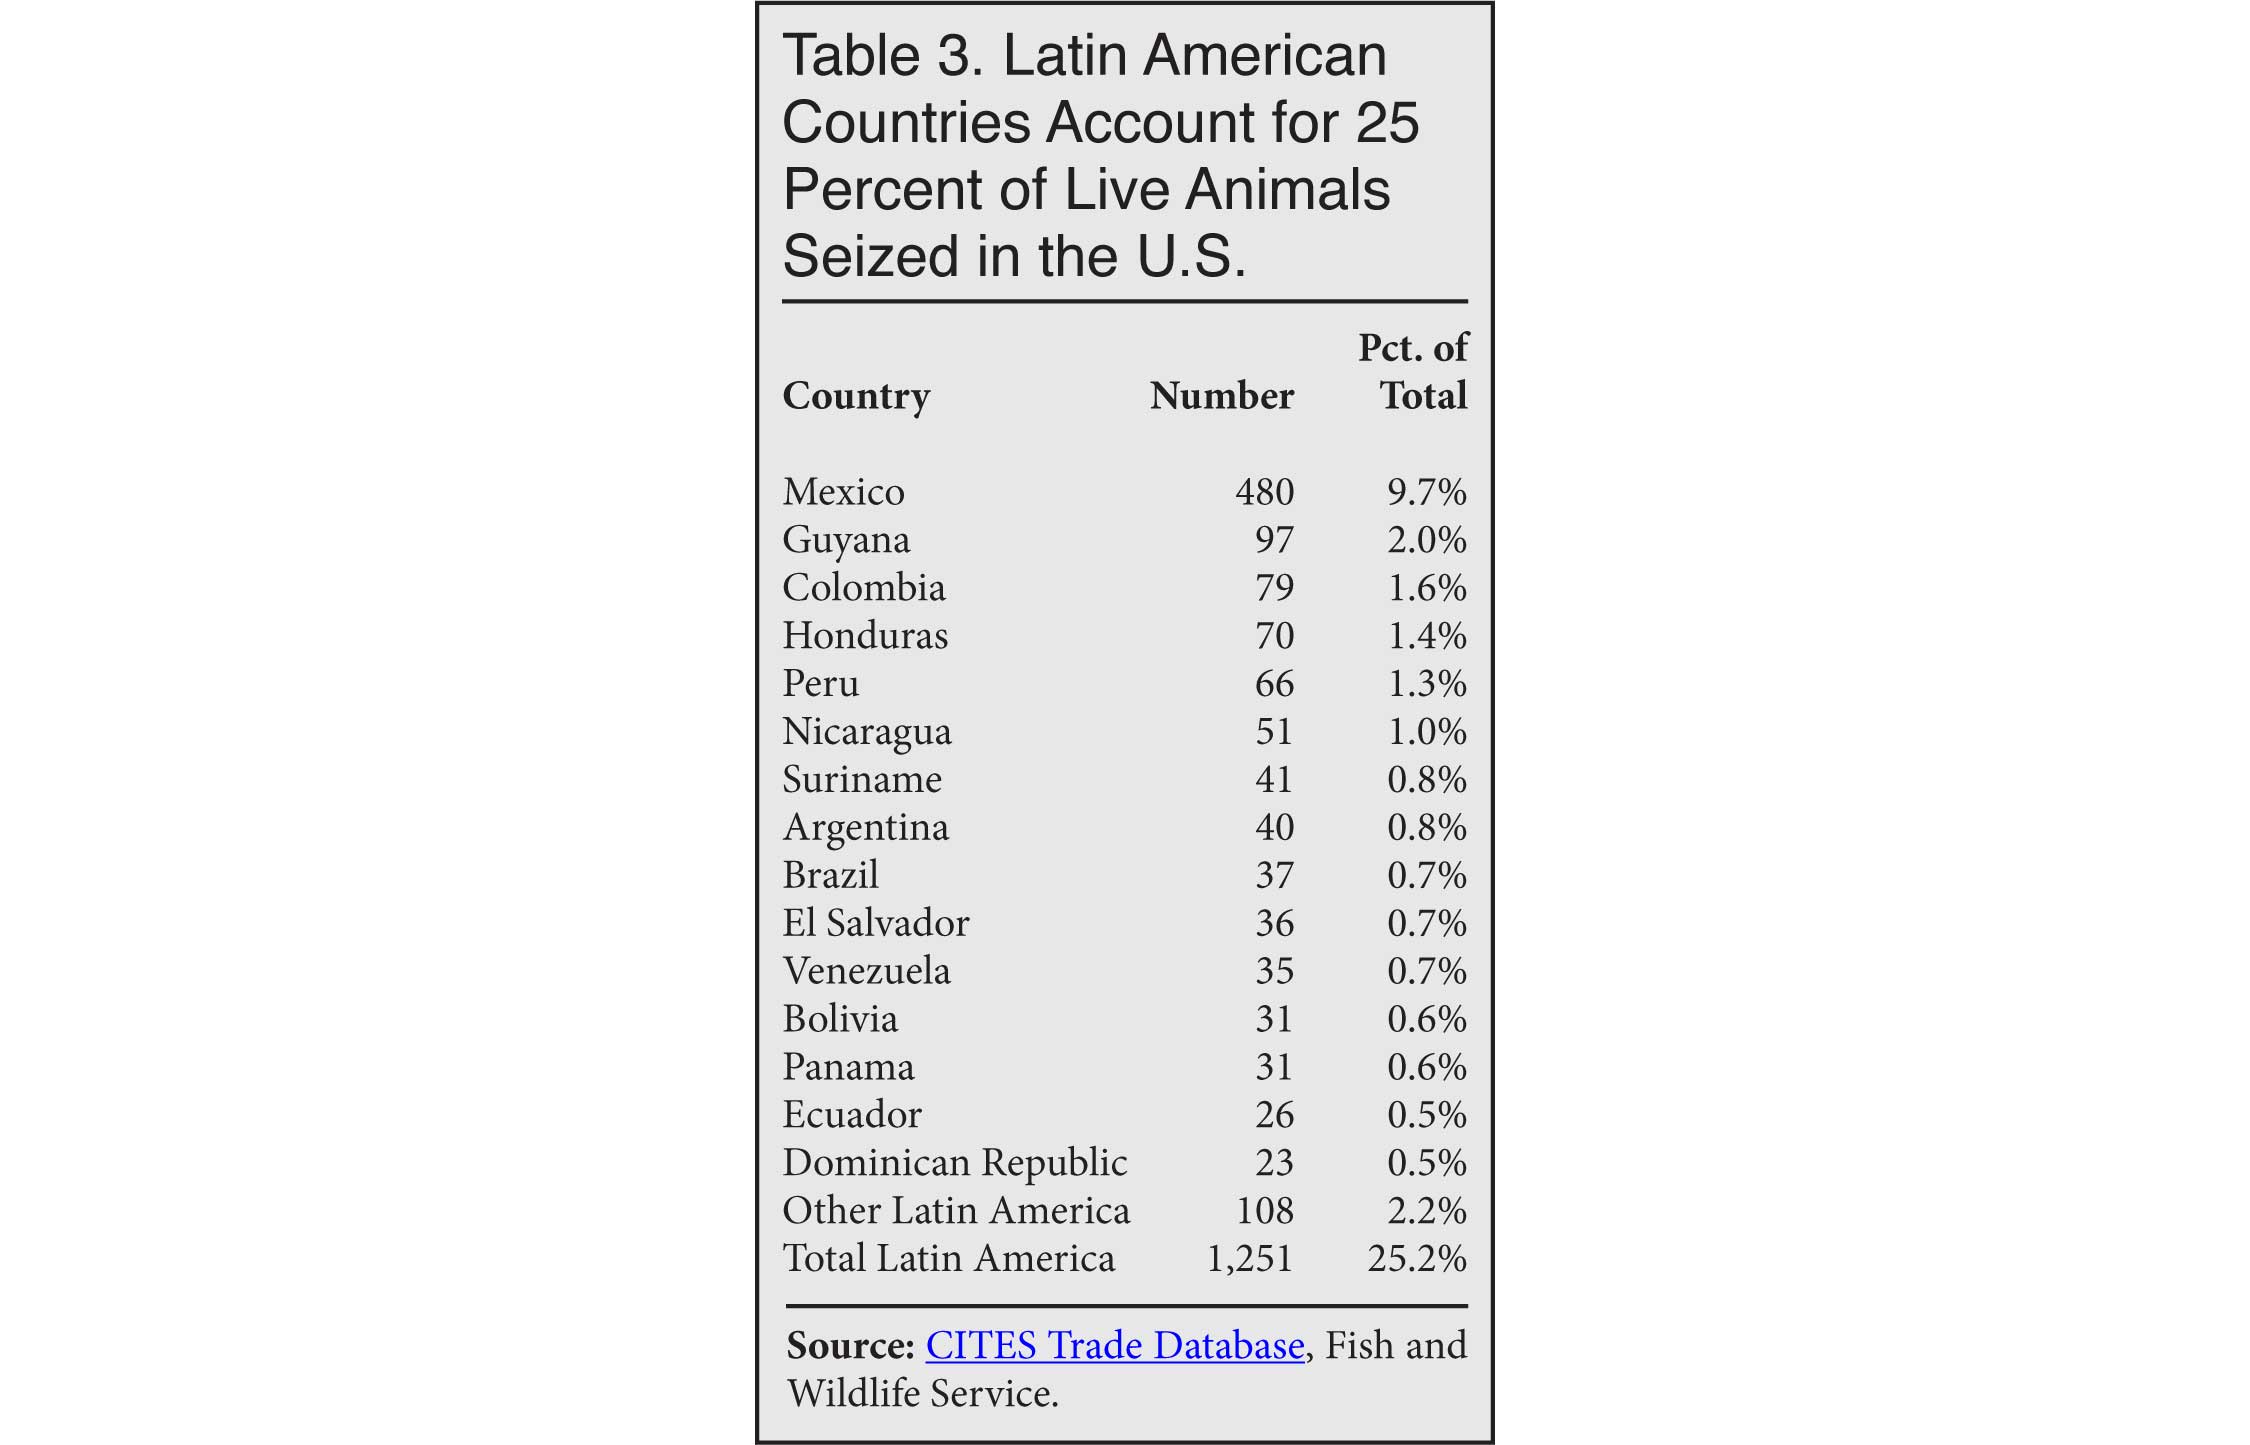 Table: Latin American countries account for 25% of live animal seizures